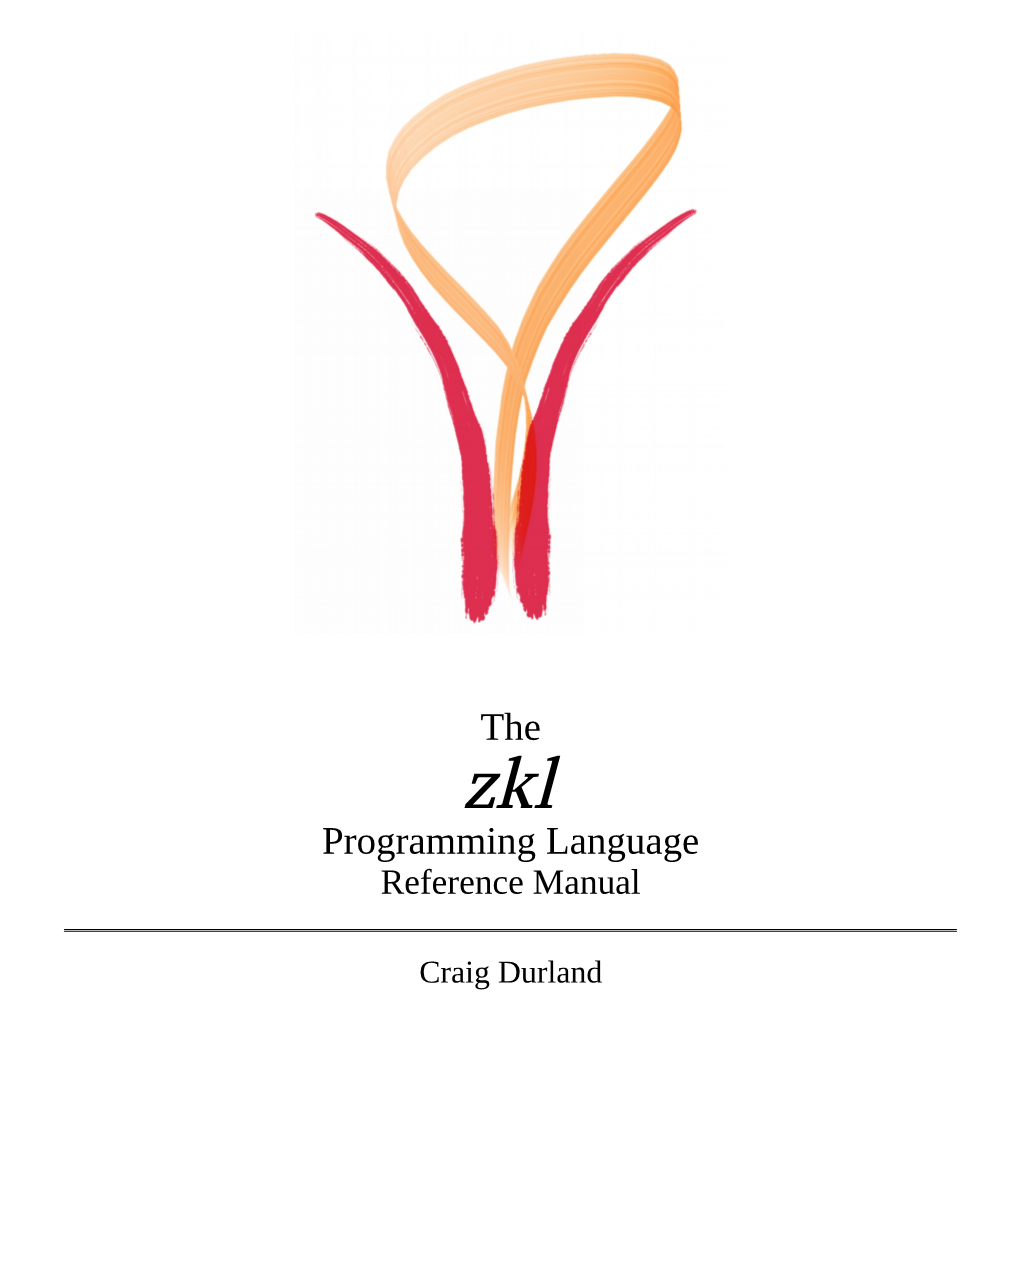 The Zkl Programming Language Reference Manual